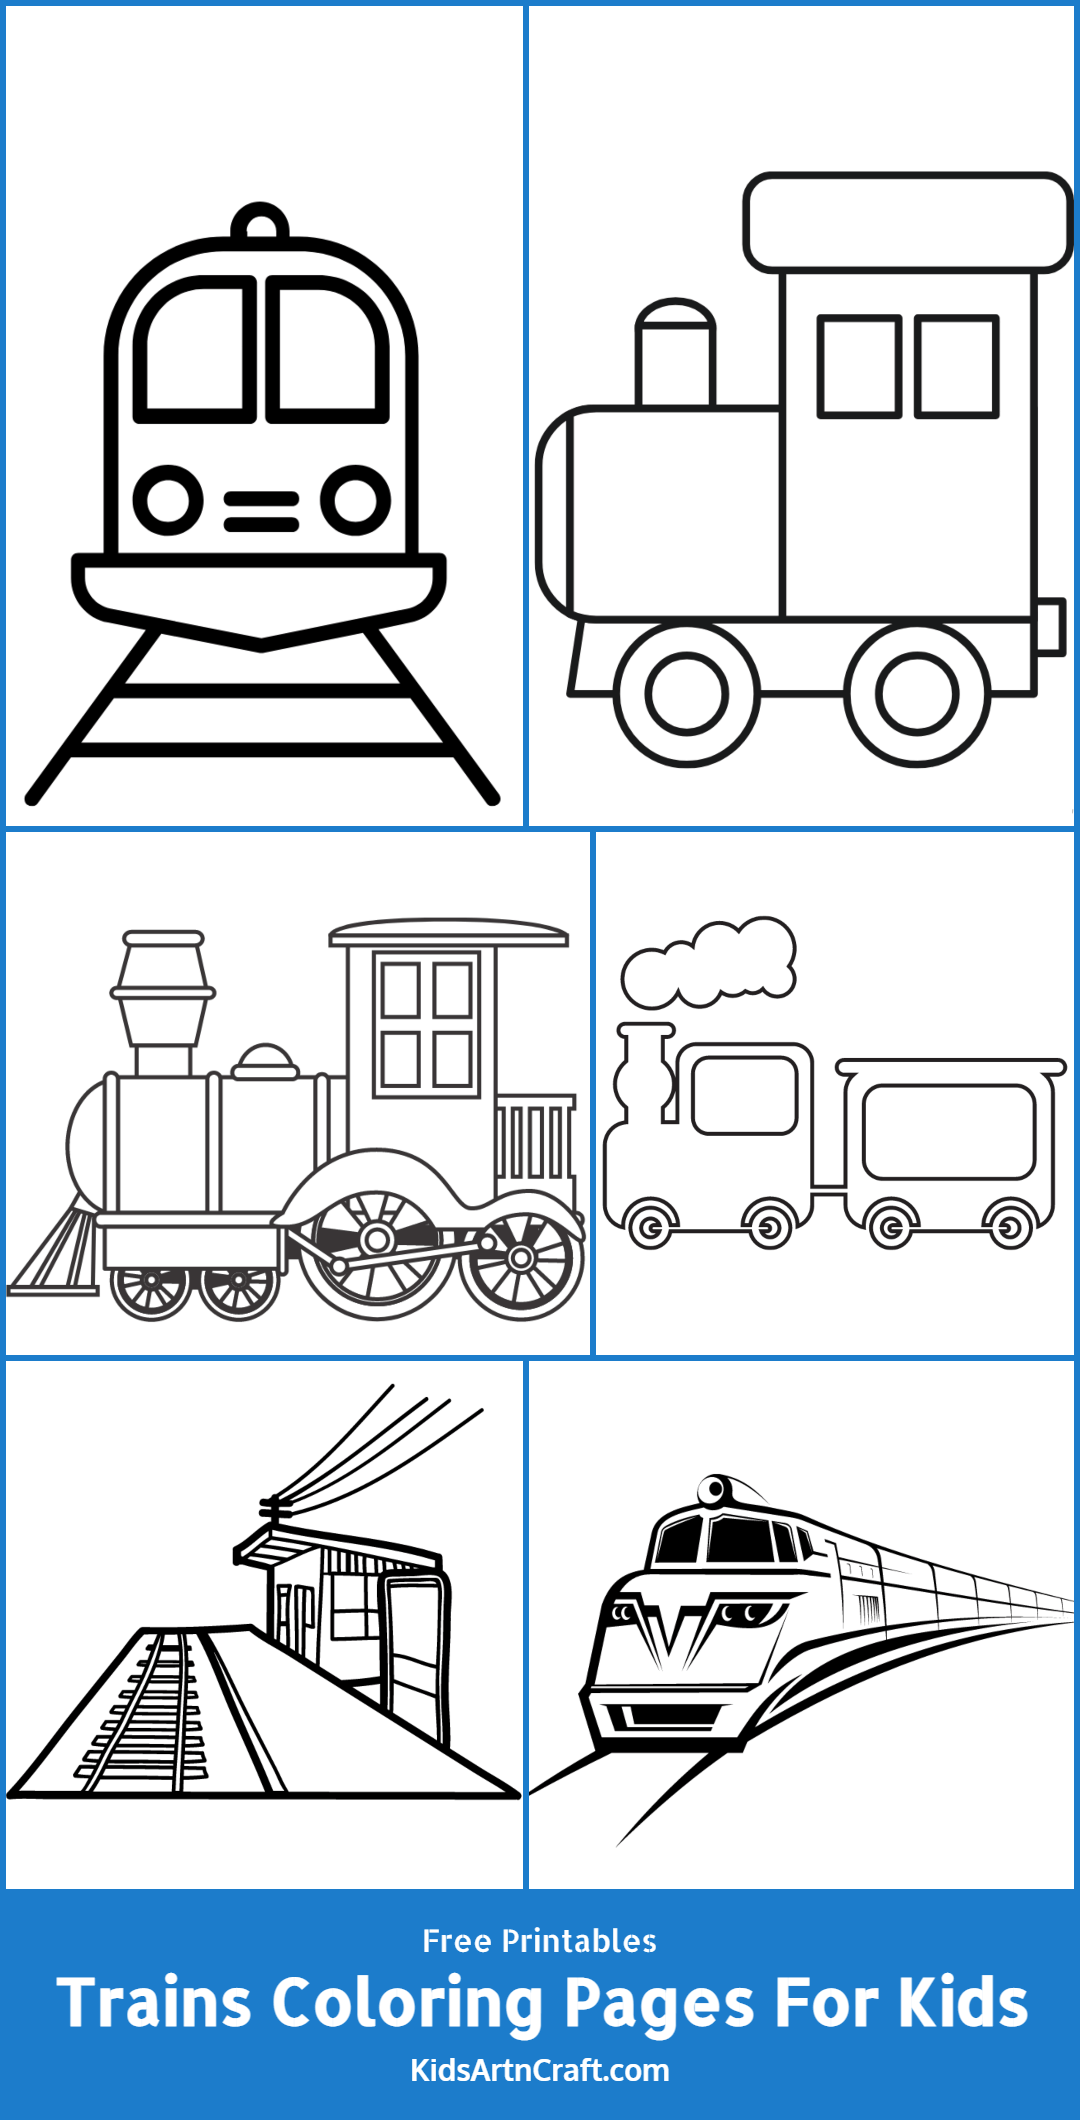 Trains Coloring Pages For Kids – Free Printables